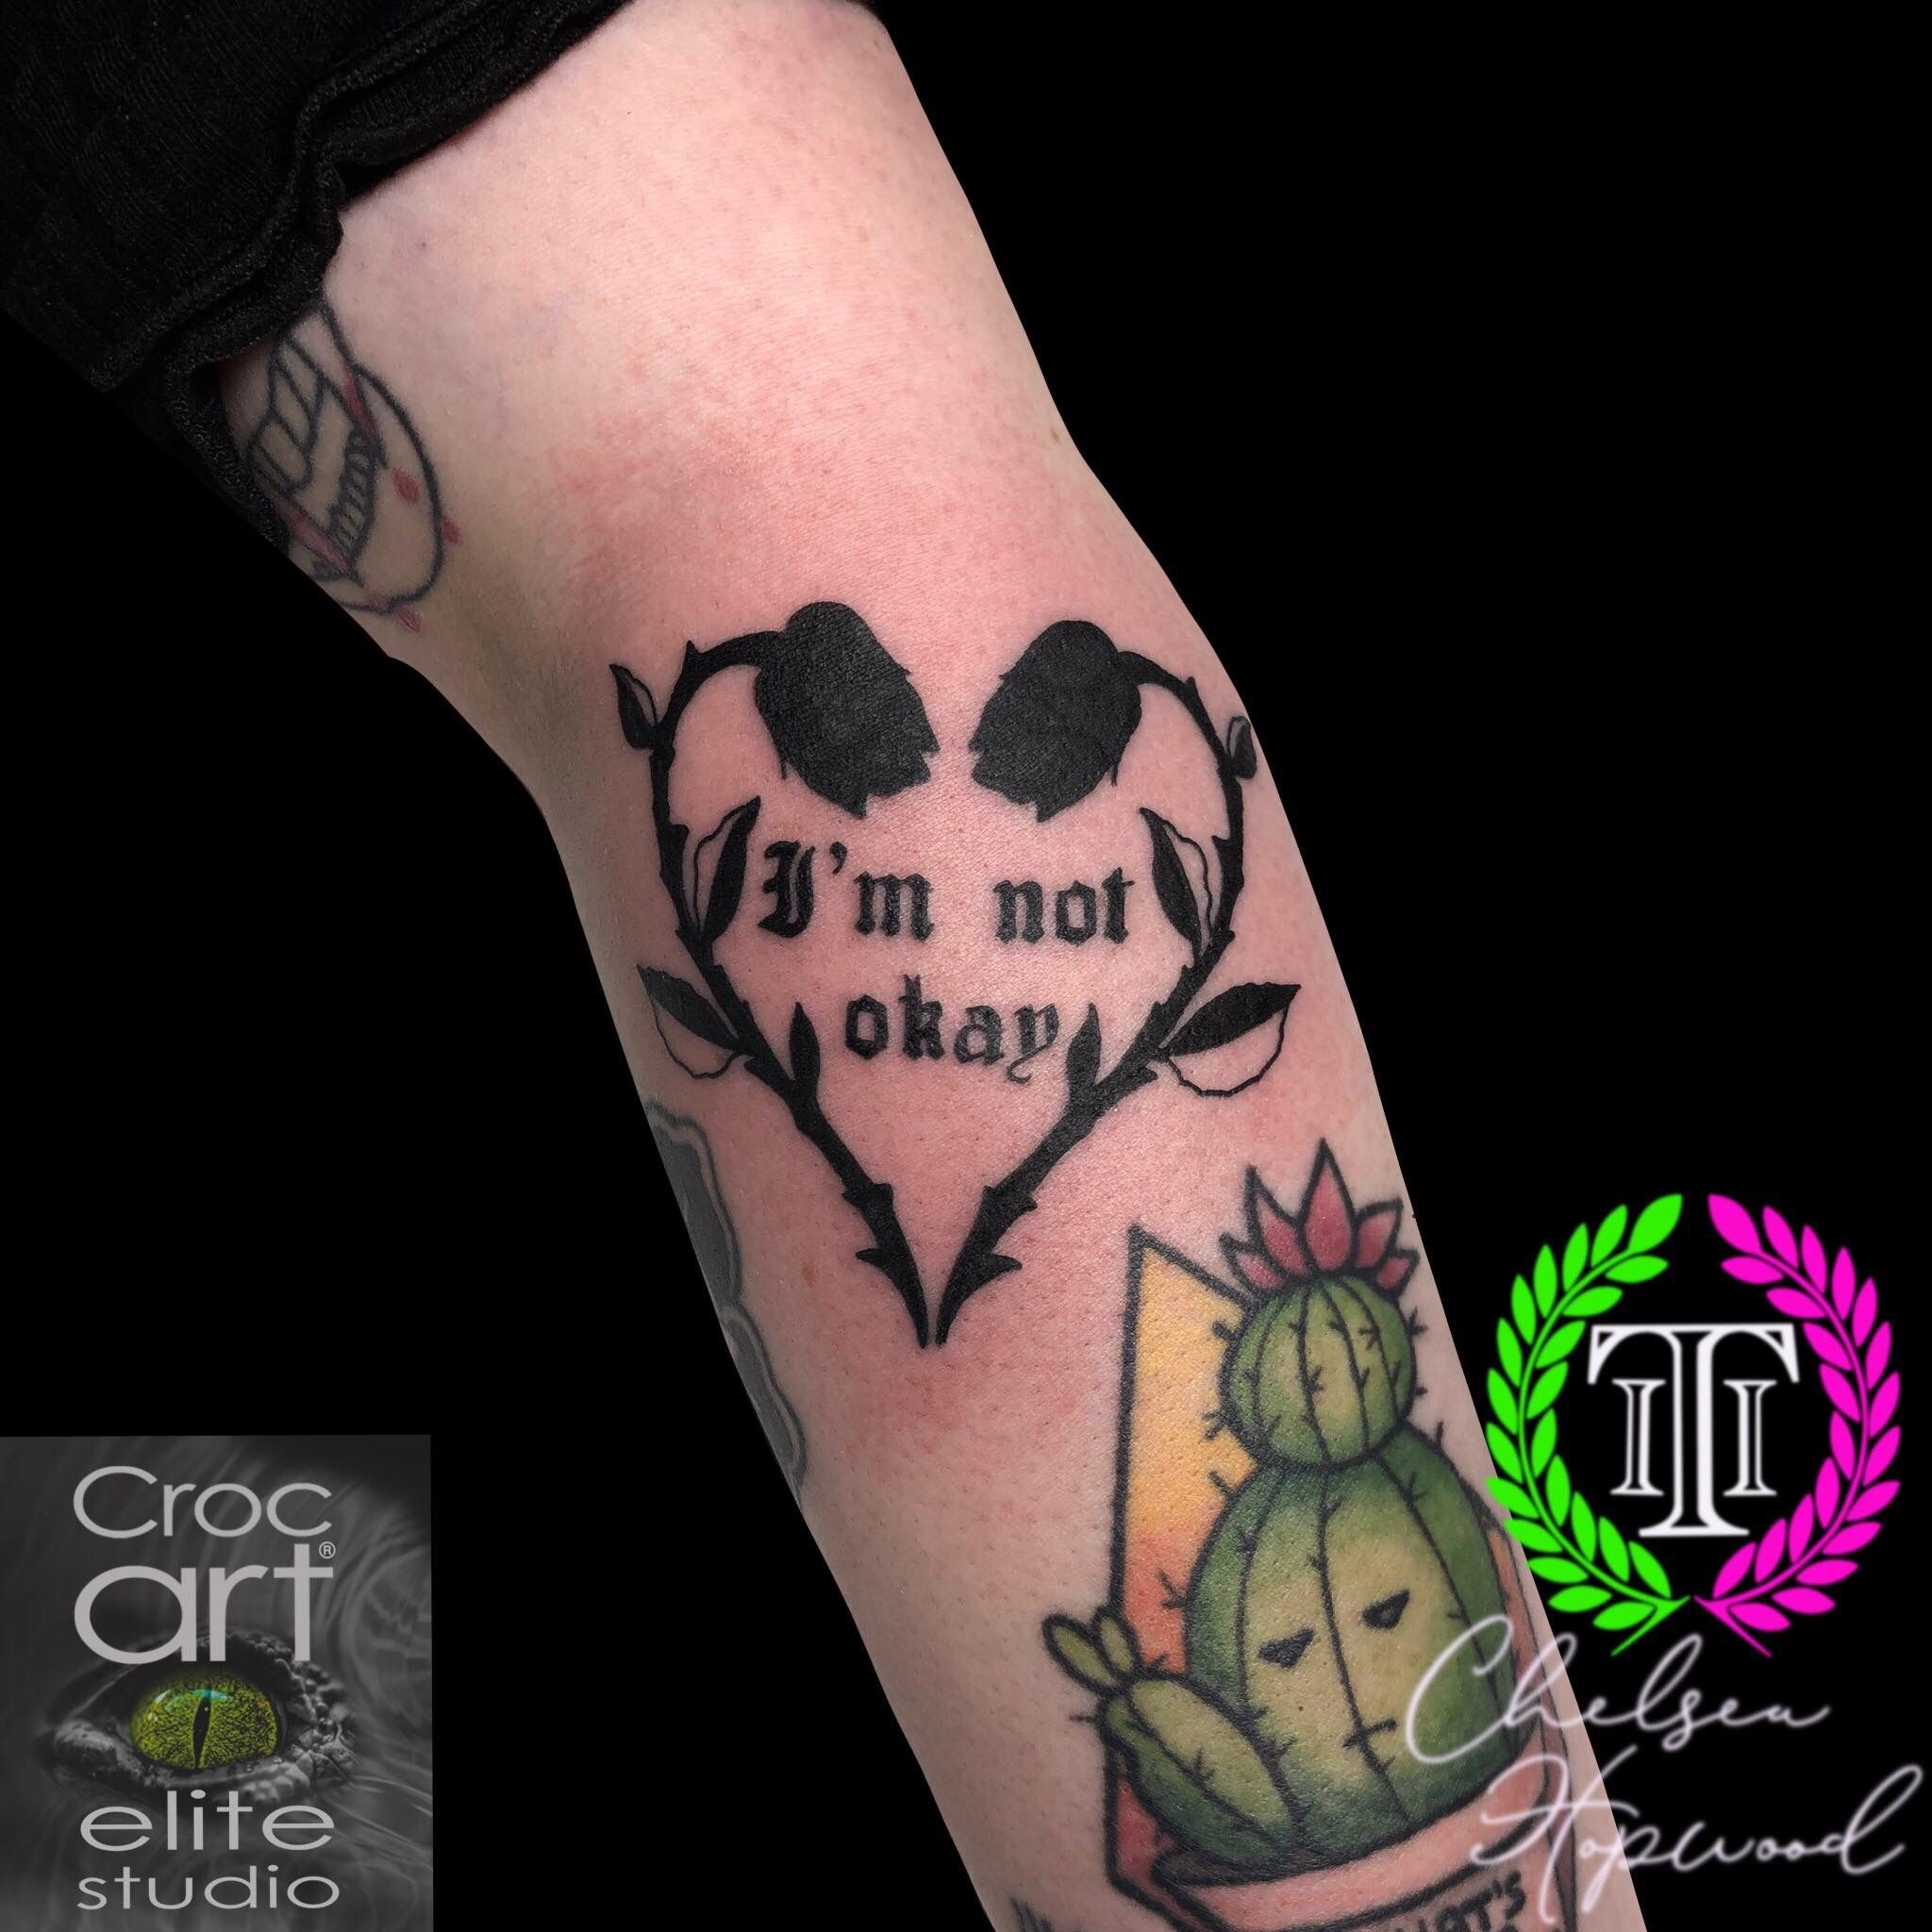 My Chemical Romance Tattoo by CannibalSuicide on DeviantArt